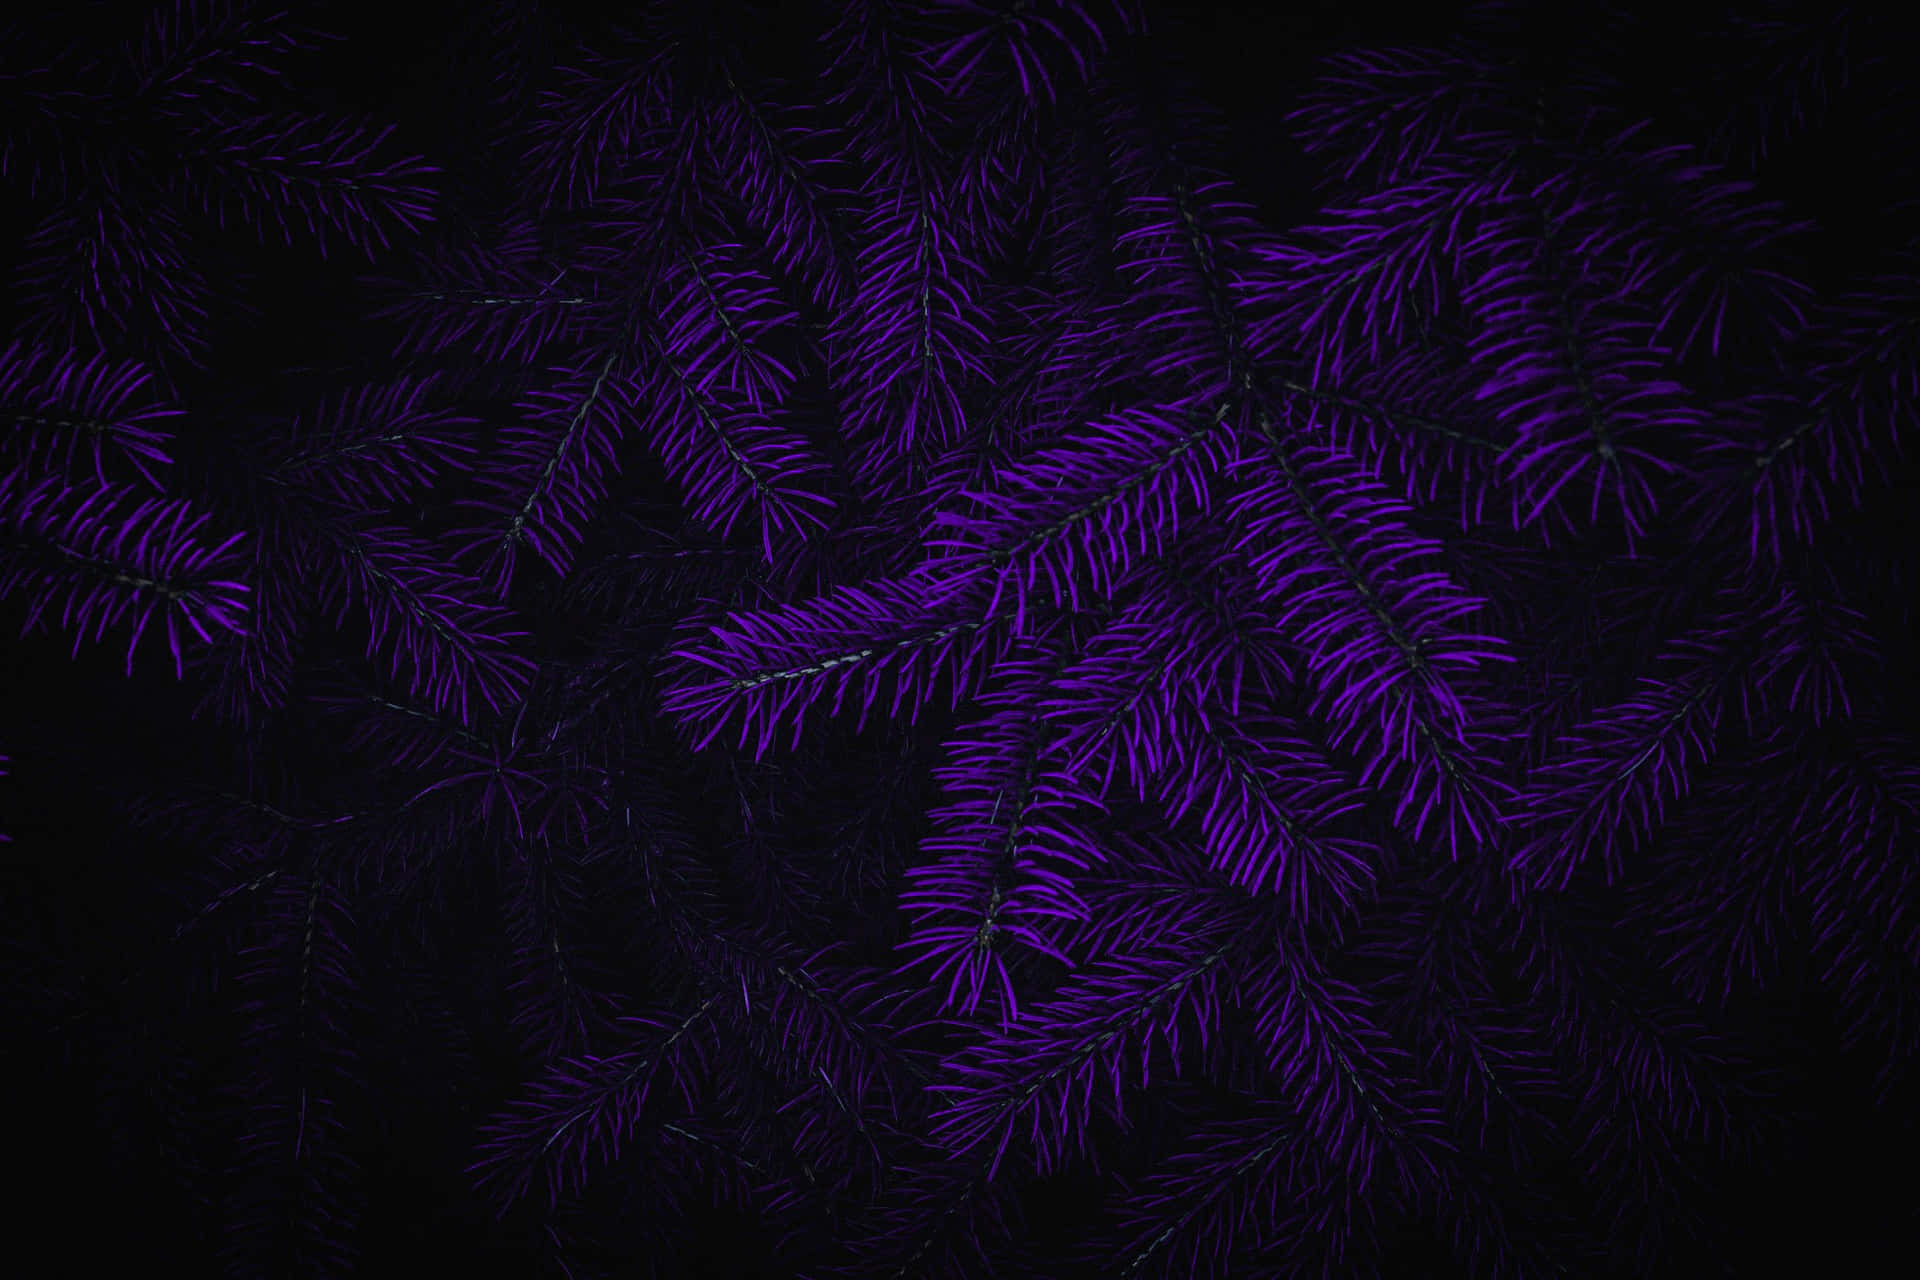 iPhone11papers.com | iPhone11 wallpaper | wb31-metal-wall-dark-purple -texture-pattern-background